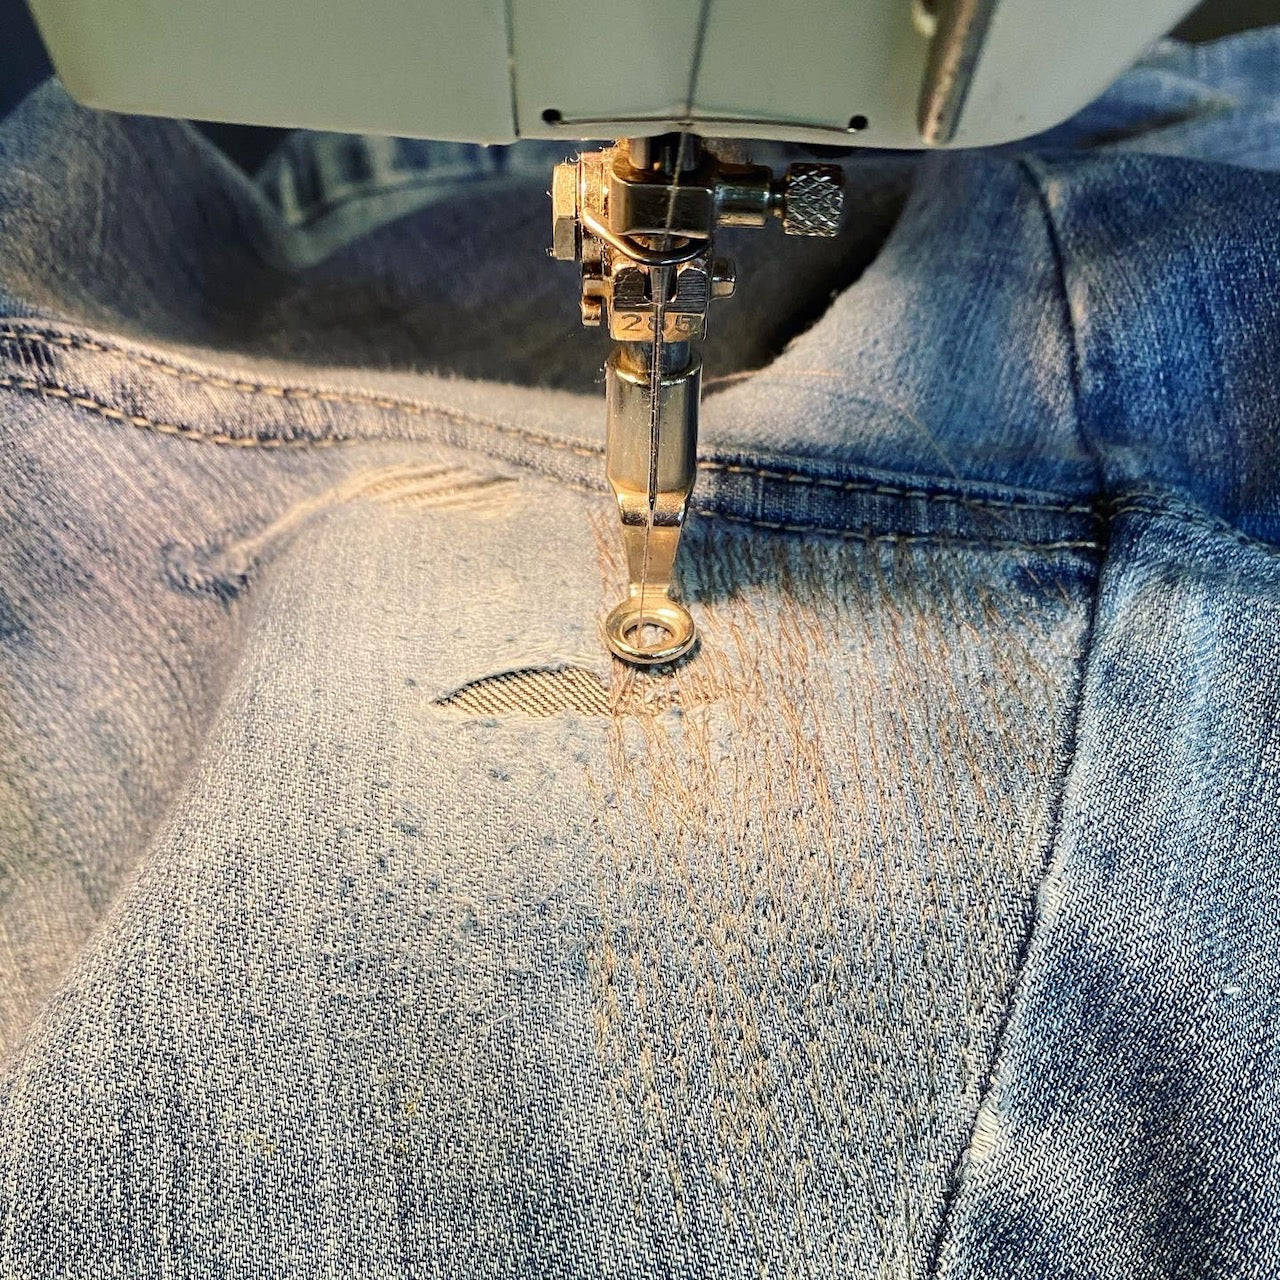 A pair of jeans is being mended with a sewing machine.